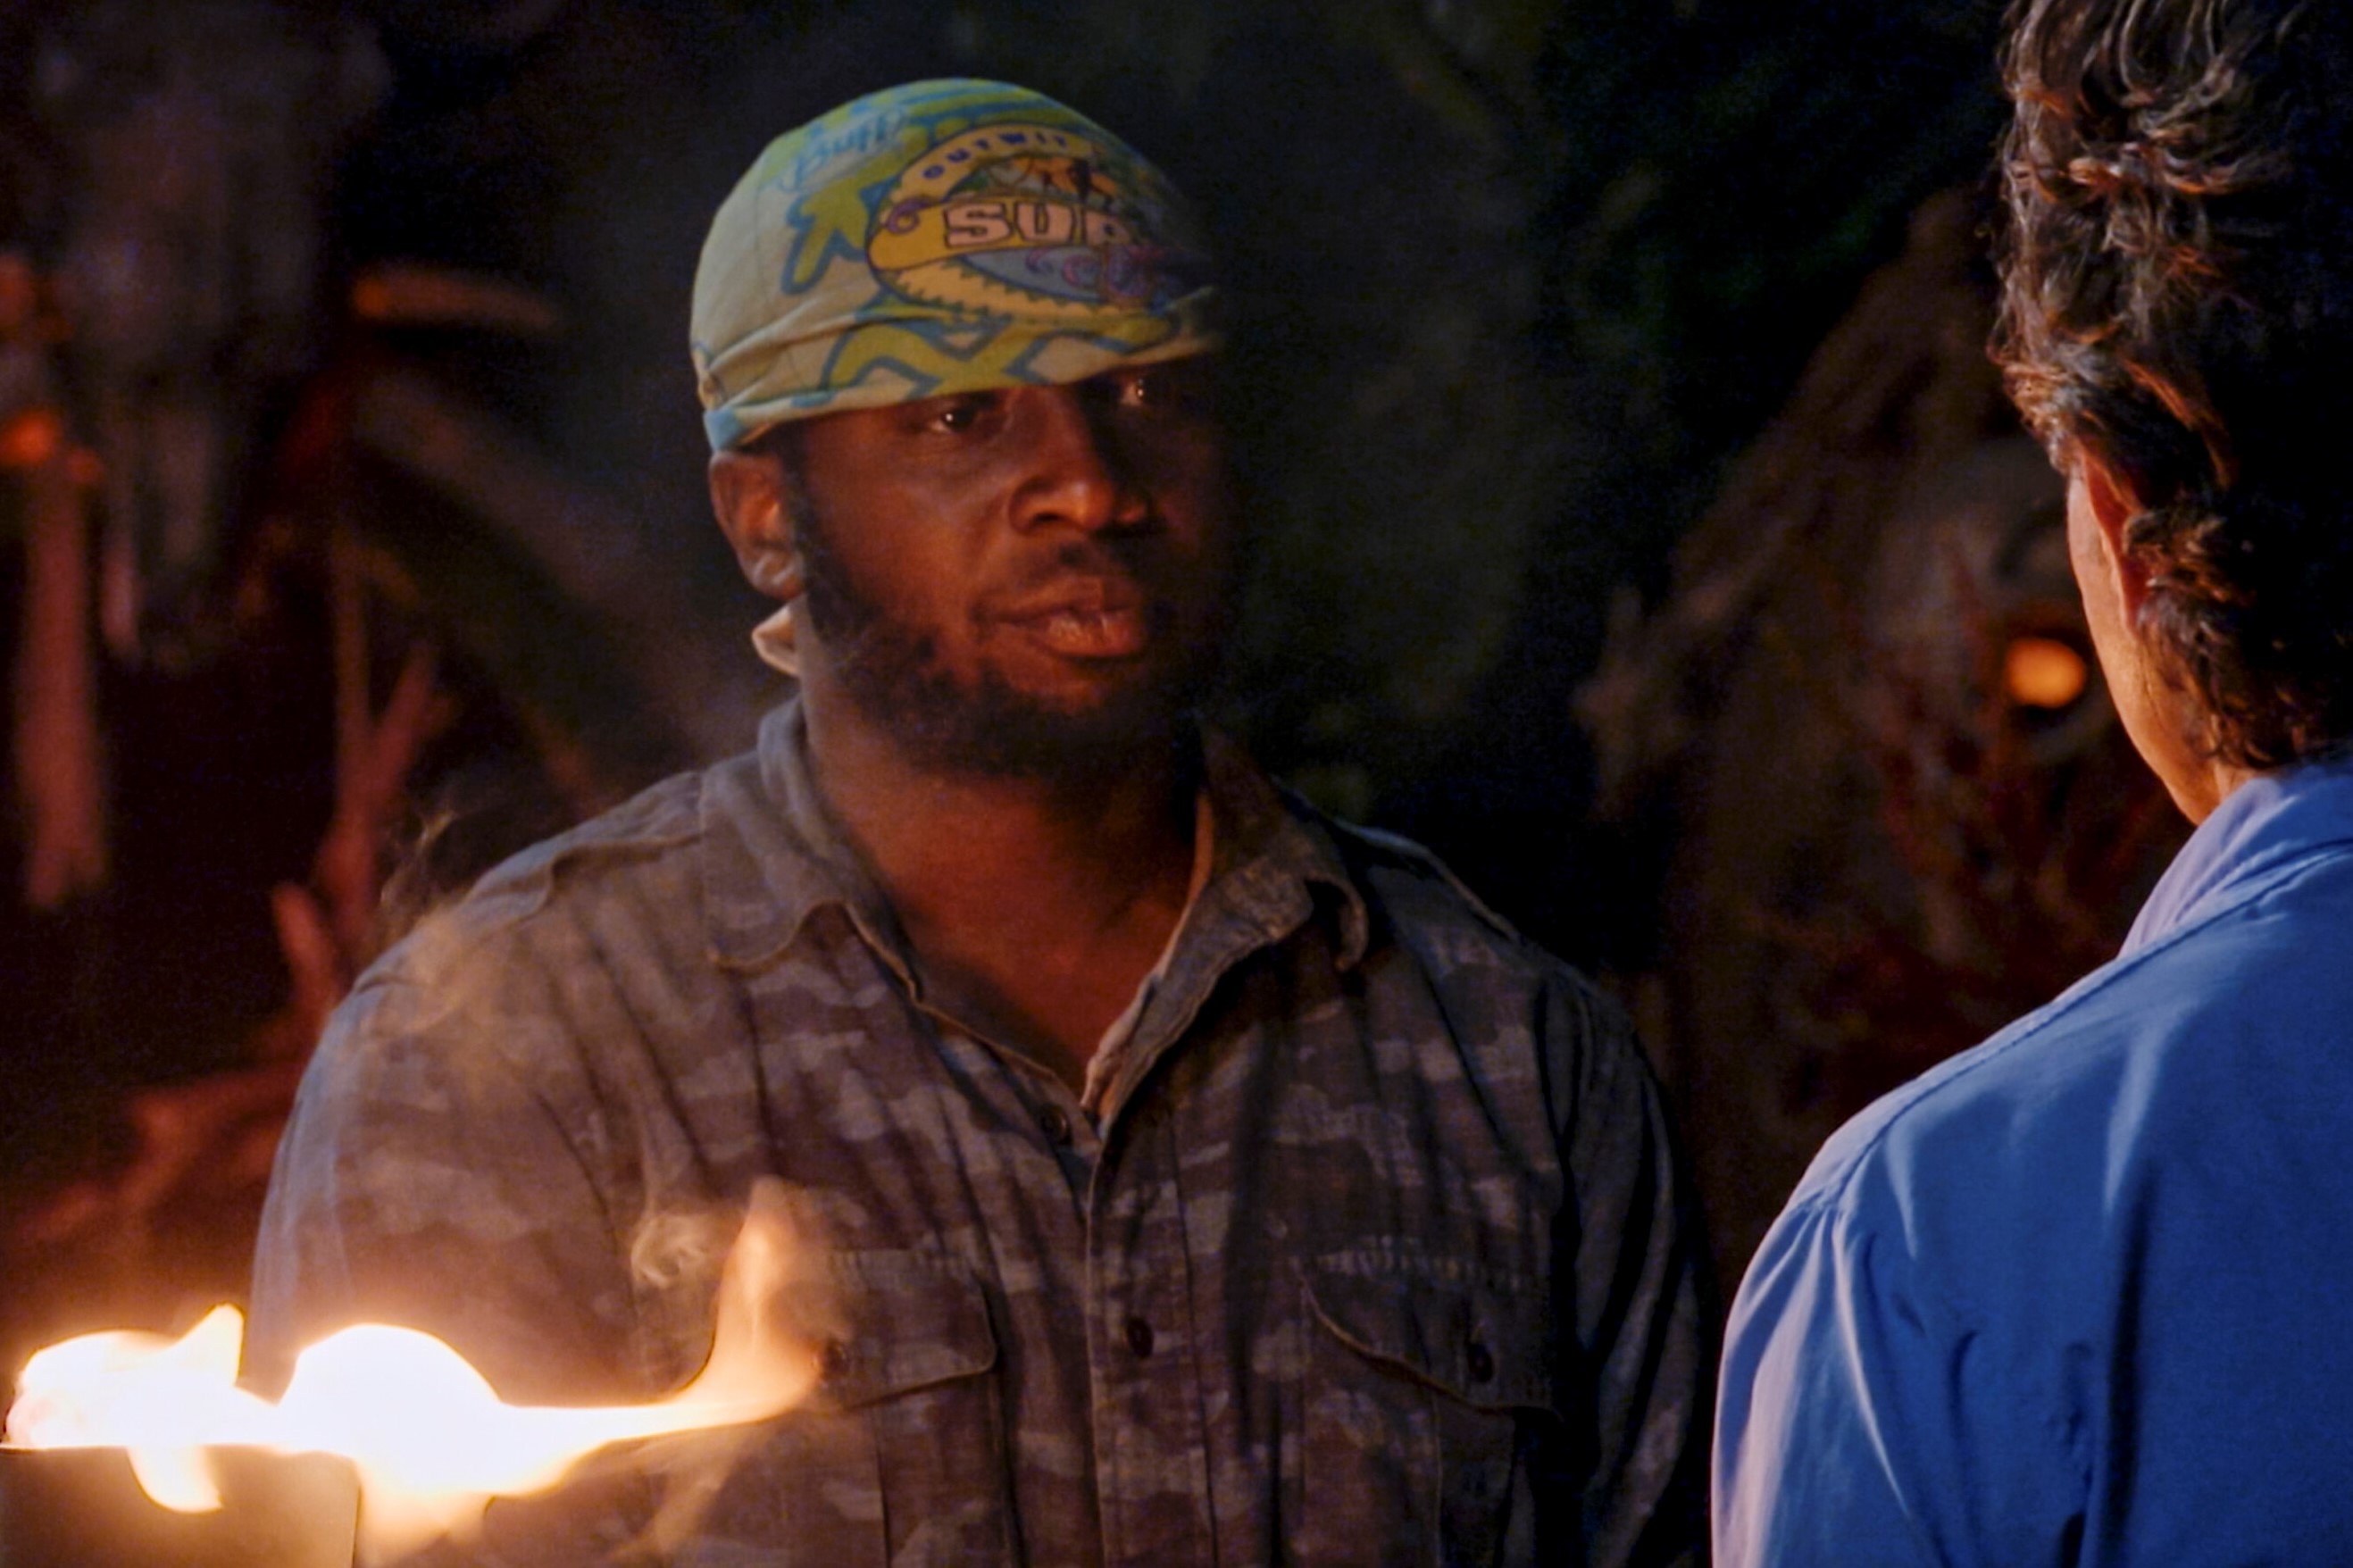 James Jones, who stars in 'Survivor' Season 43 on CBS, gets his torch snuffed by Jeff Probst. James wears a blue camo button-up shirt and his light blue 'Survivor' buff around his head.